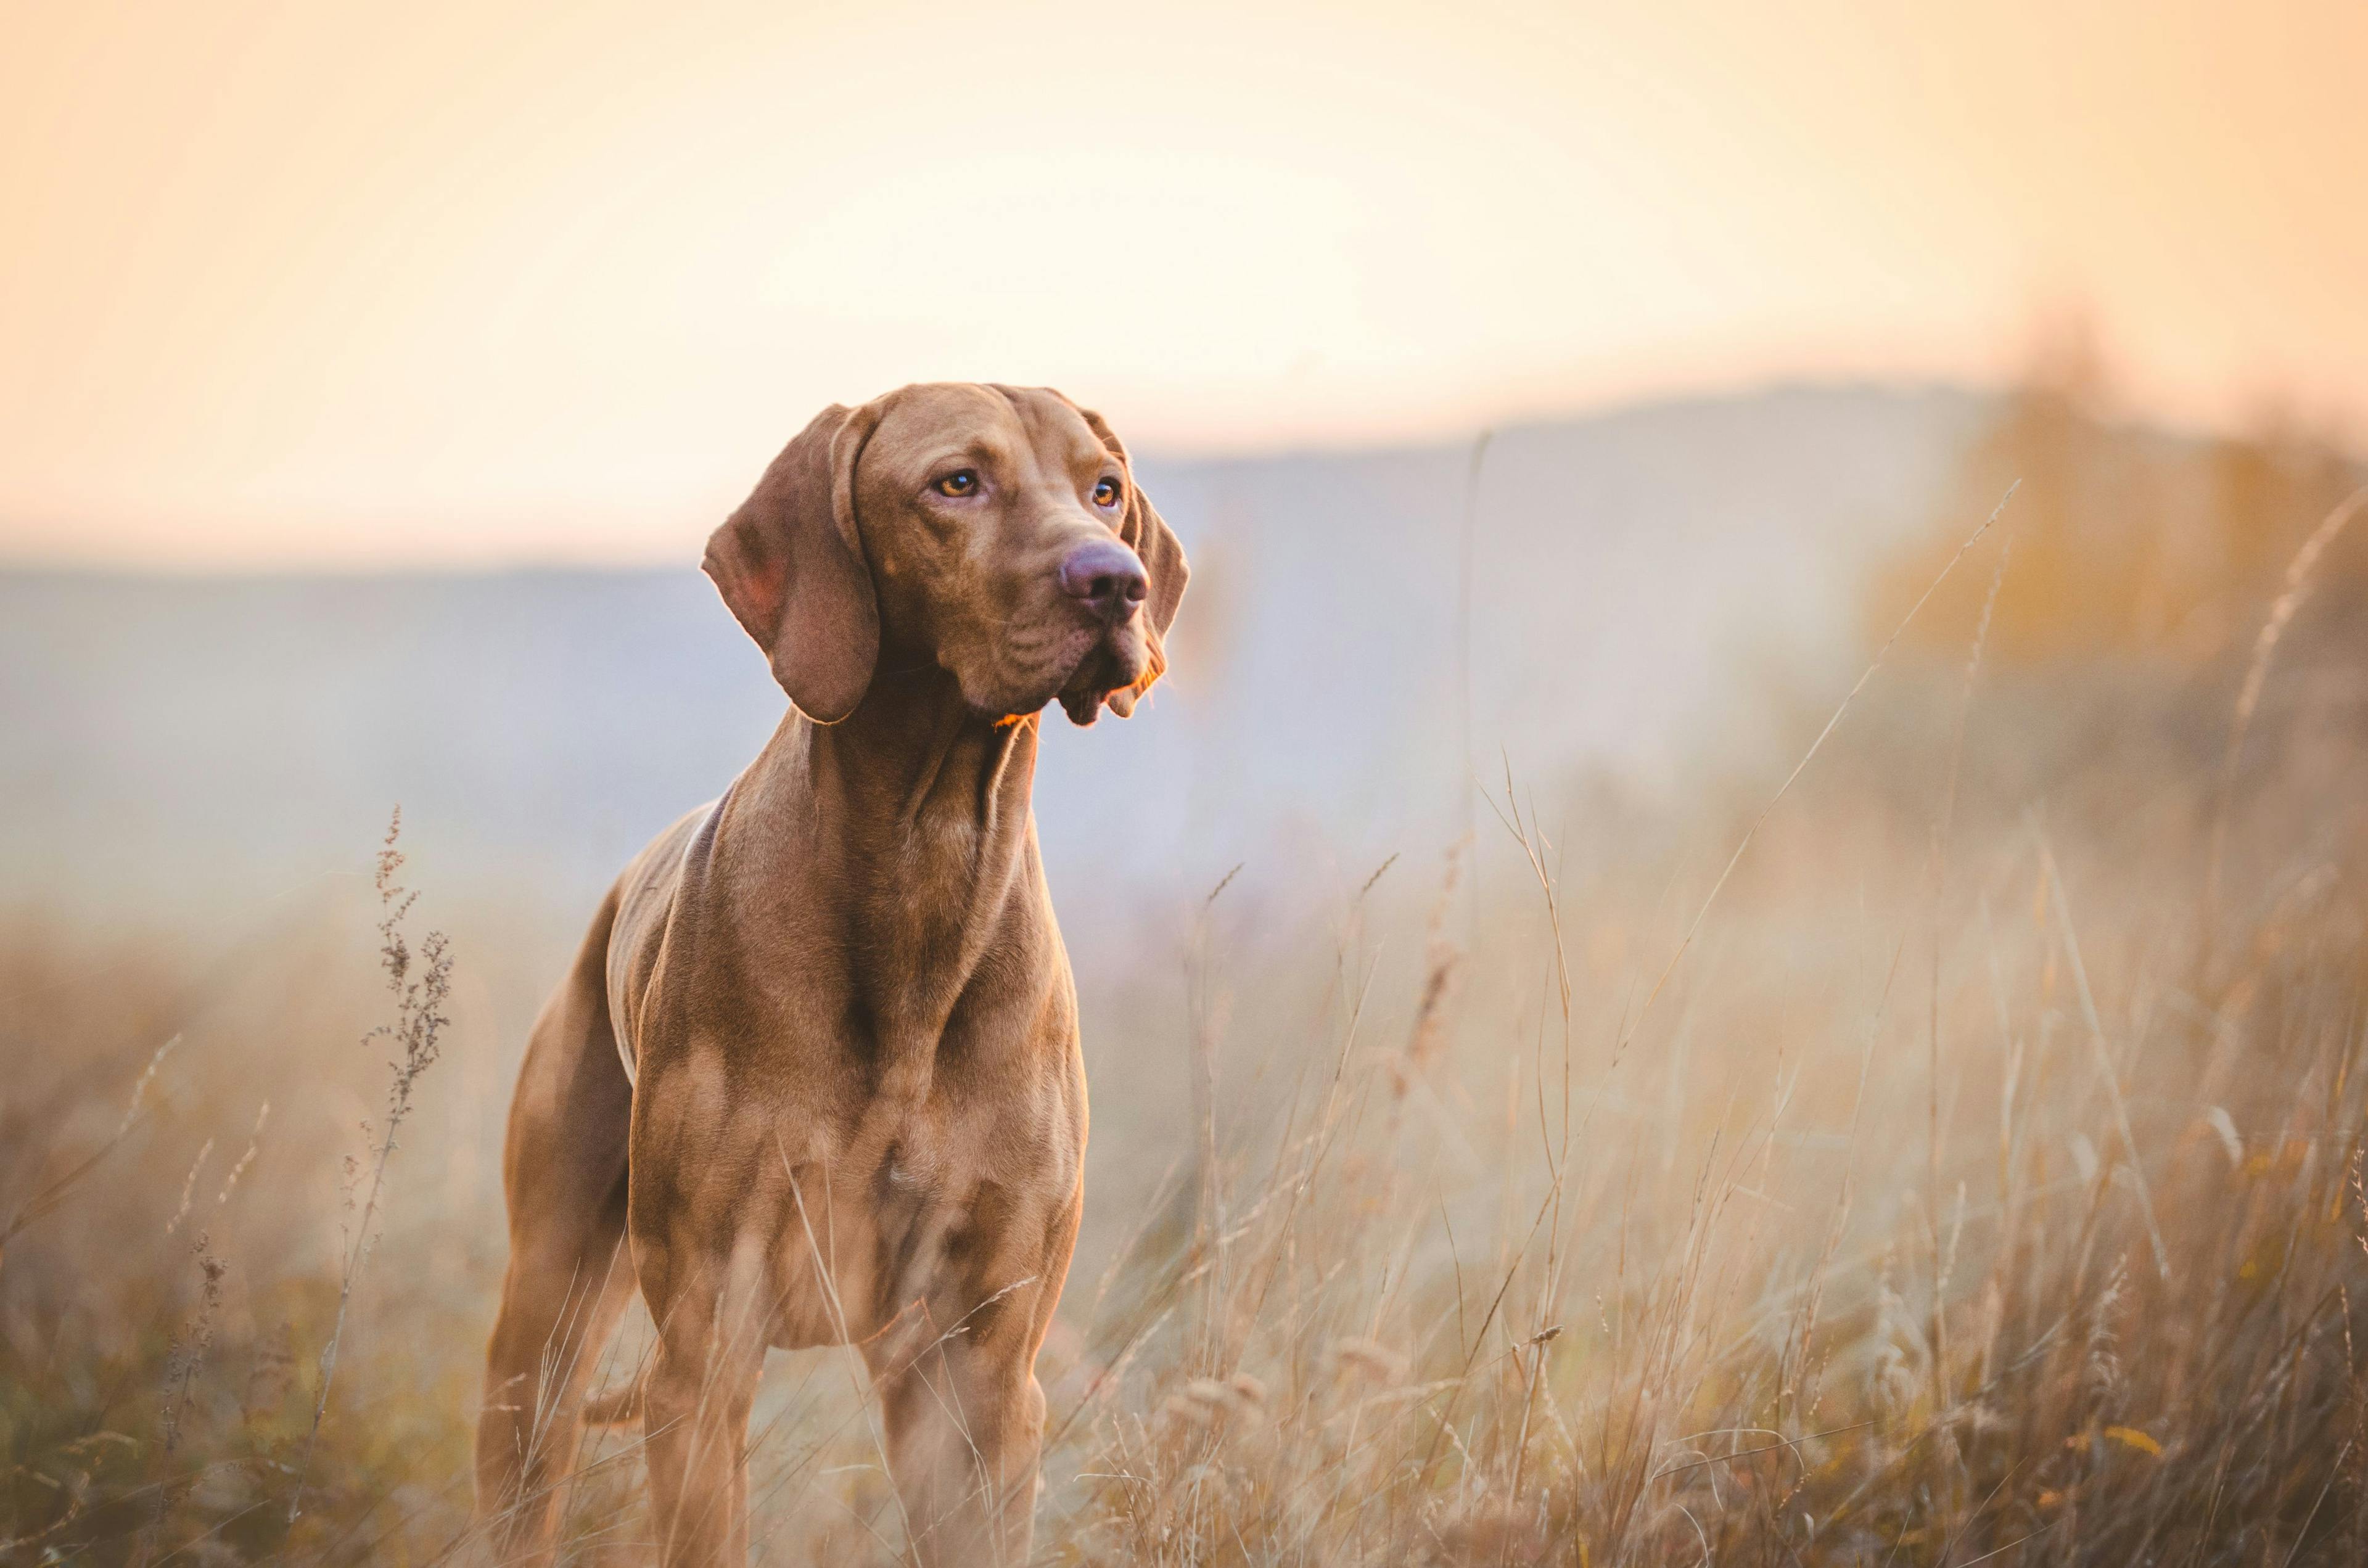 FDA approved afoxolaner, moxidectin, and pyrantel chewable tablets for the protection of dogs against fleas, ricks, heartworm disease, roundworms, and hookworms. Credit: tmart_foto | stock.adobe.com